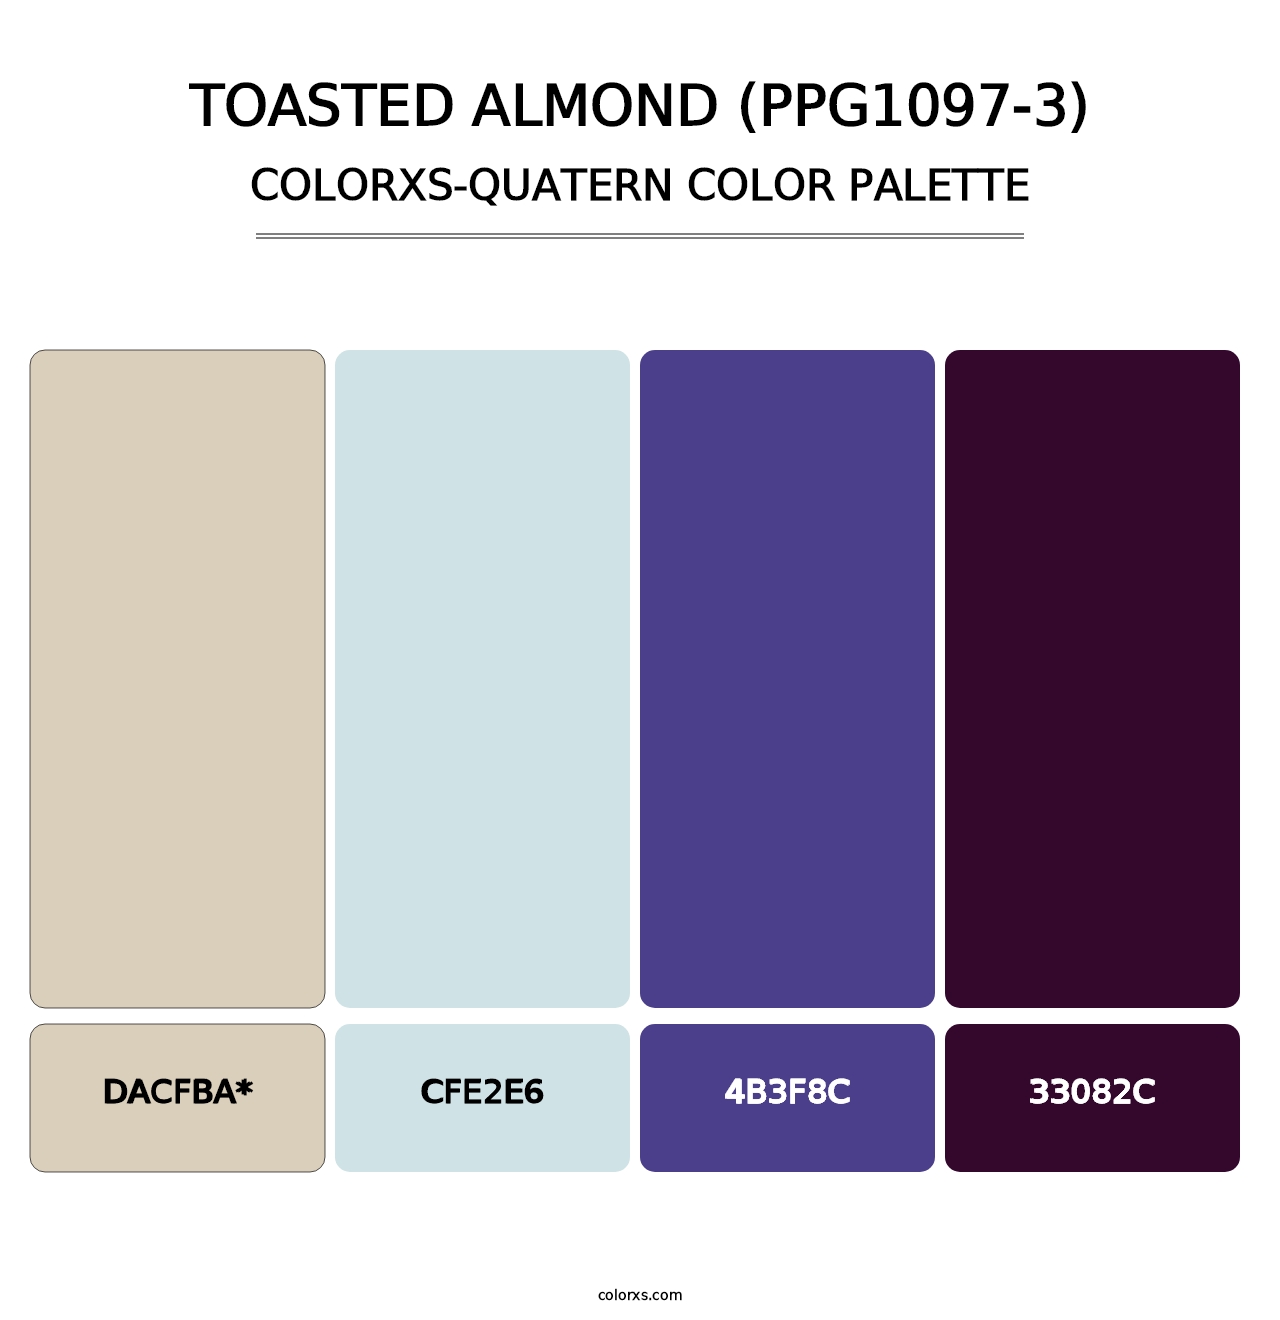 Toasted Almond (PPG1097-3) - Colorxs Quatern Palette